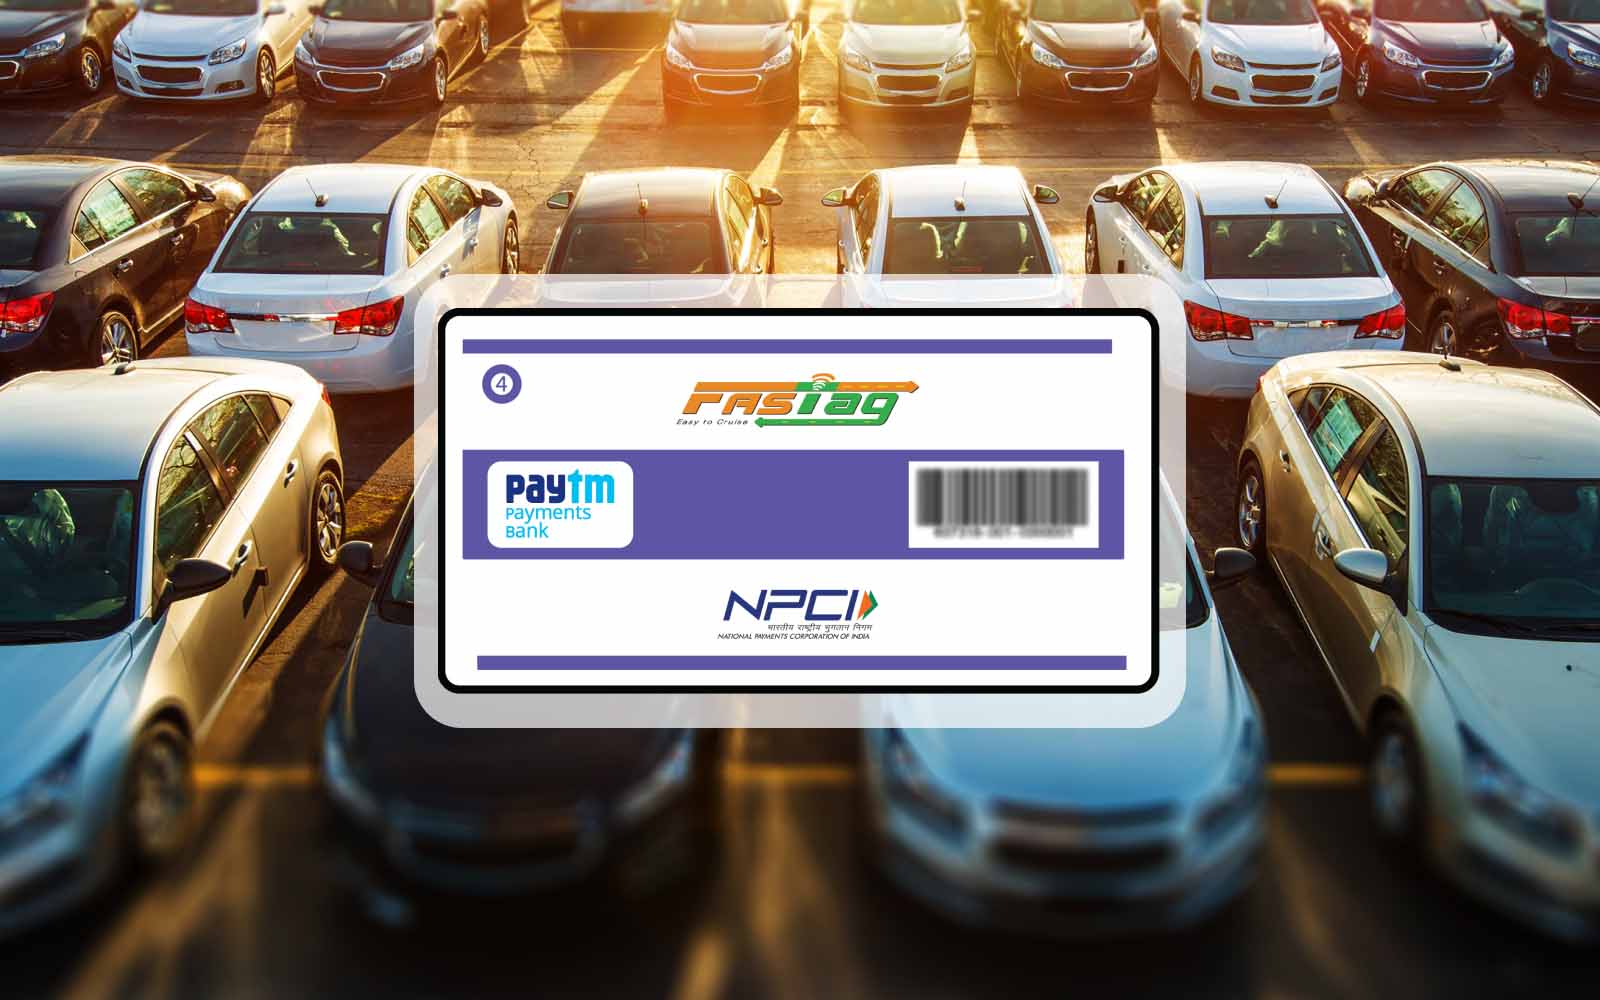 NHAI Fastag: Buy, Recharge, Login & Check Balance of FASTag